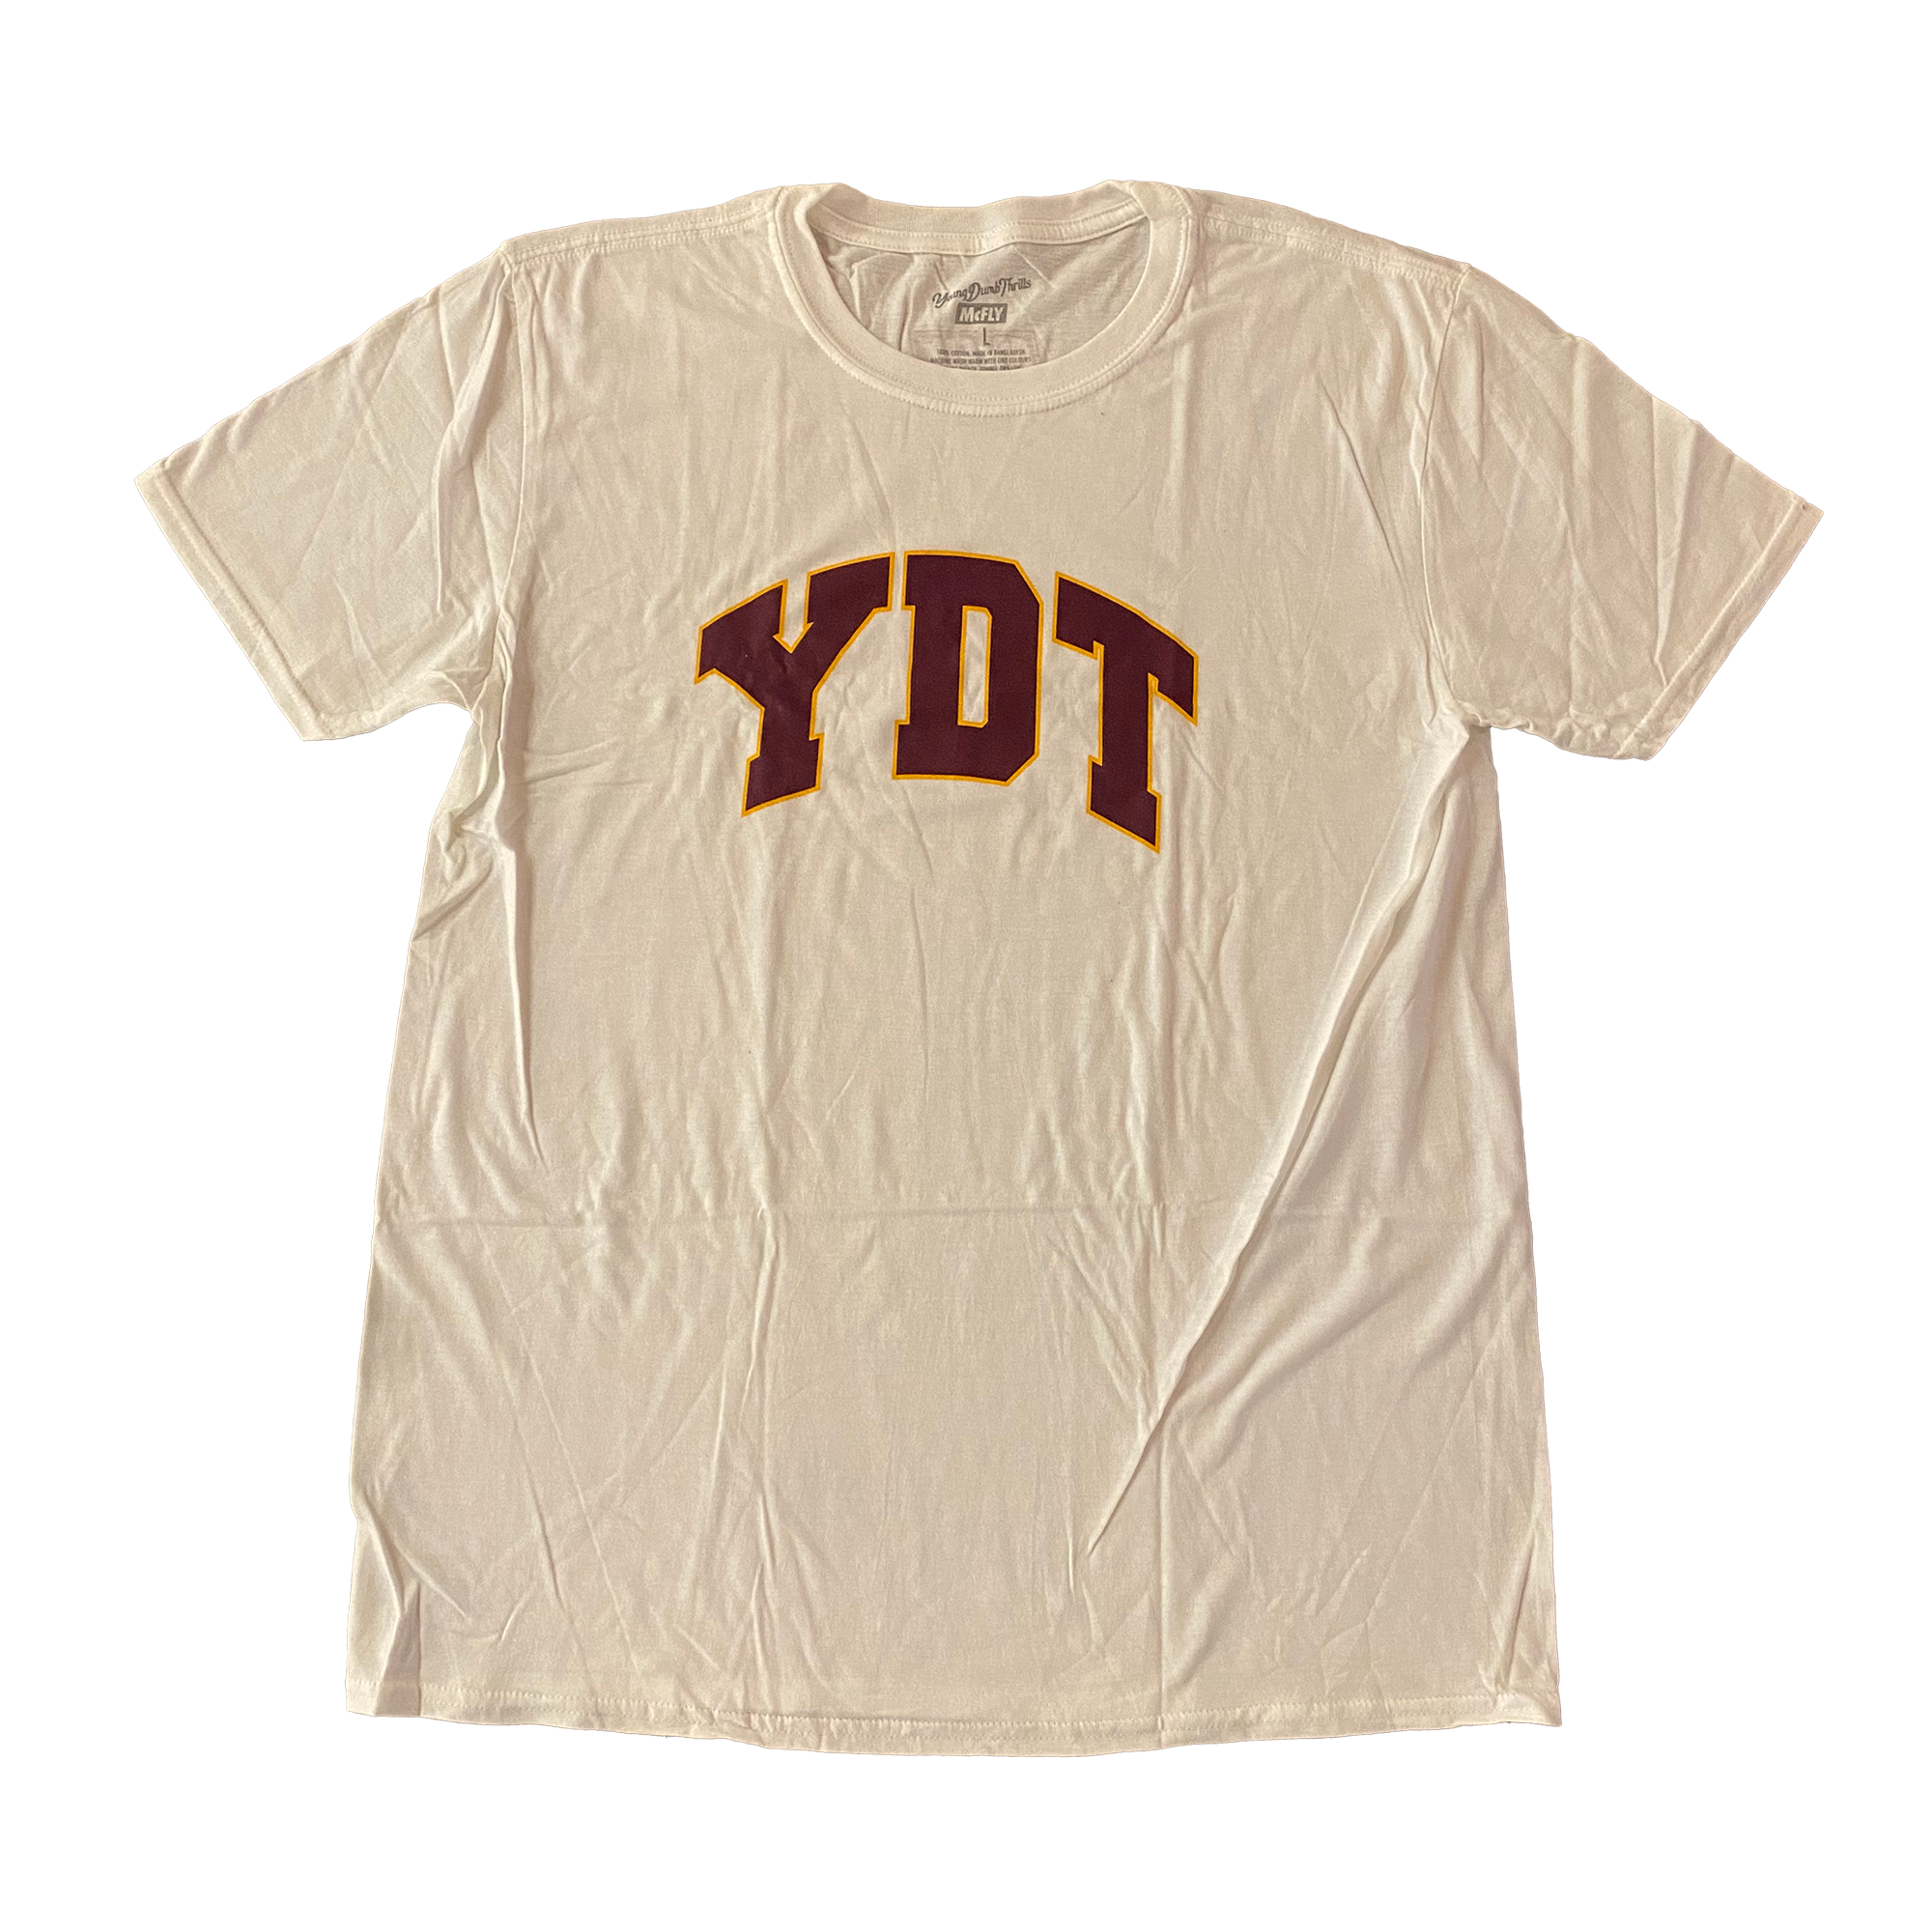 Ydt College Tee